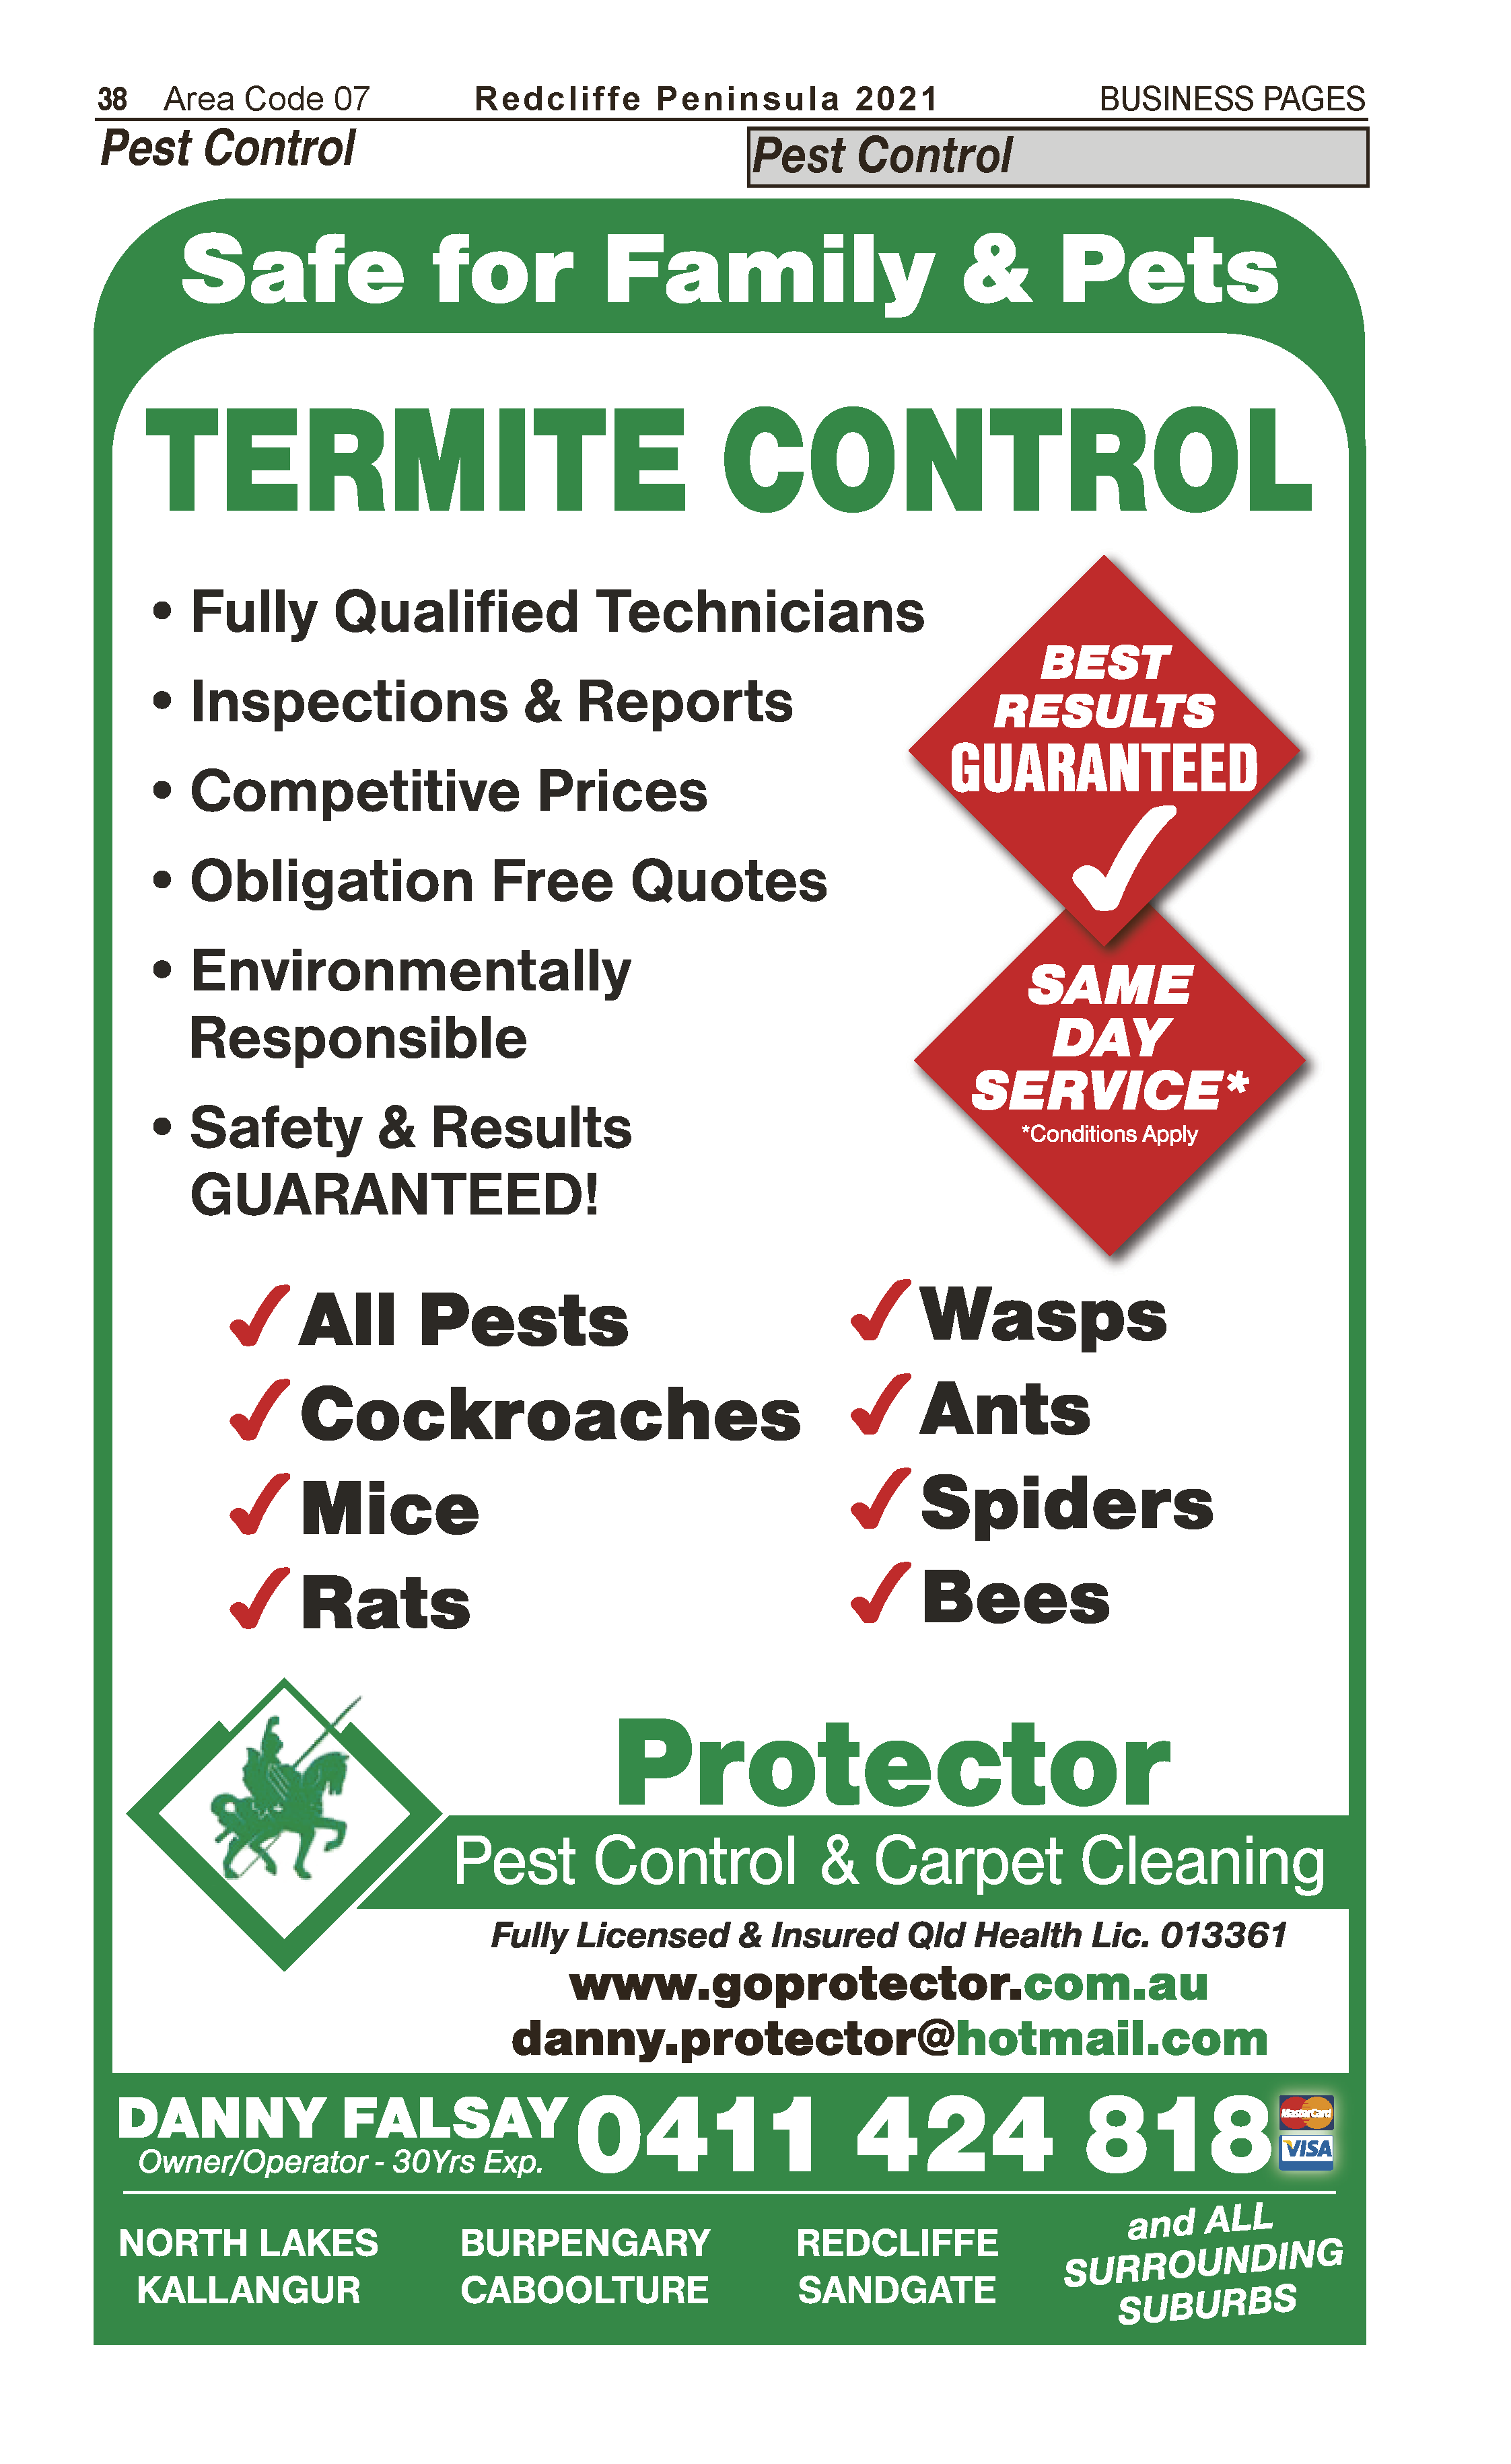 Protector Pest Control & Carpet Cleaning | Pest Control in Redcliffe | PBezy Pocket Books local directories - page 38